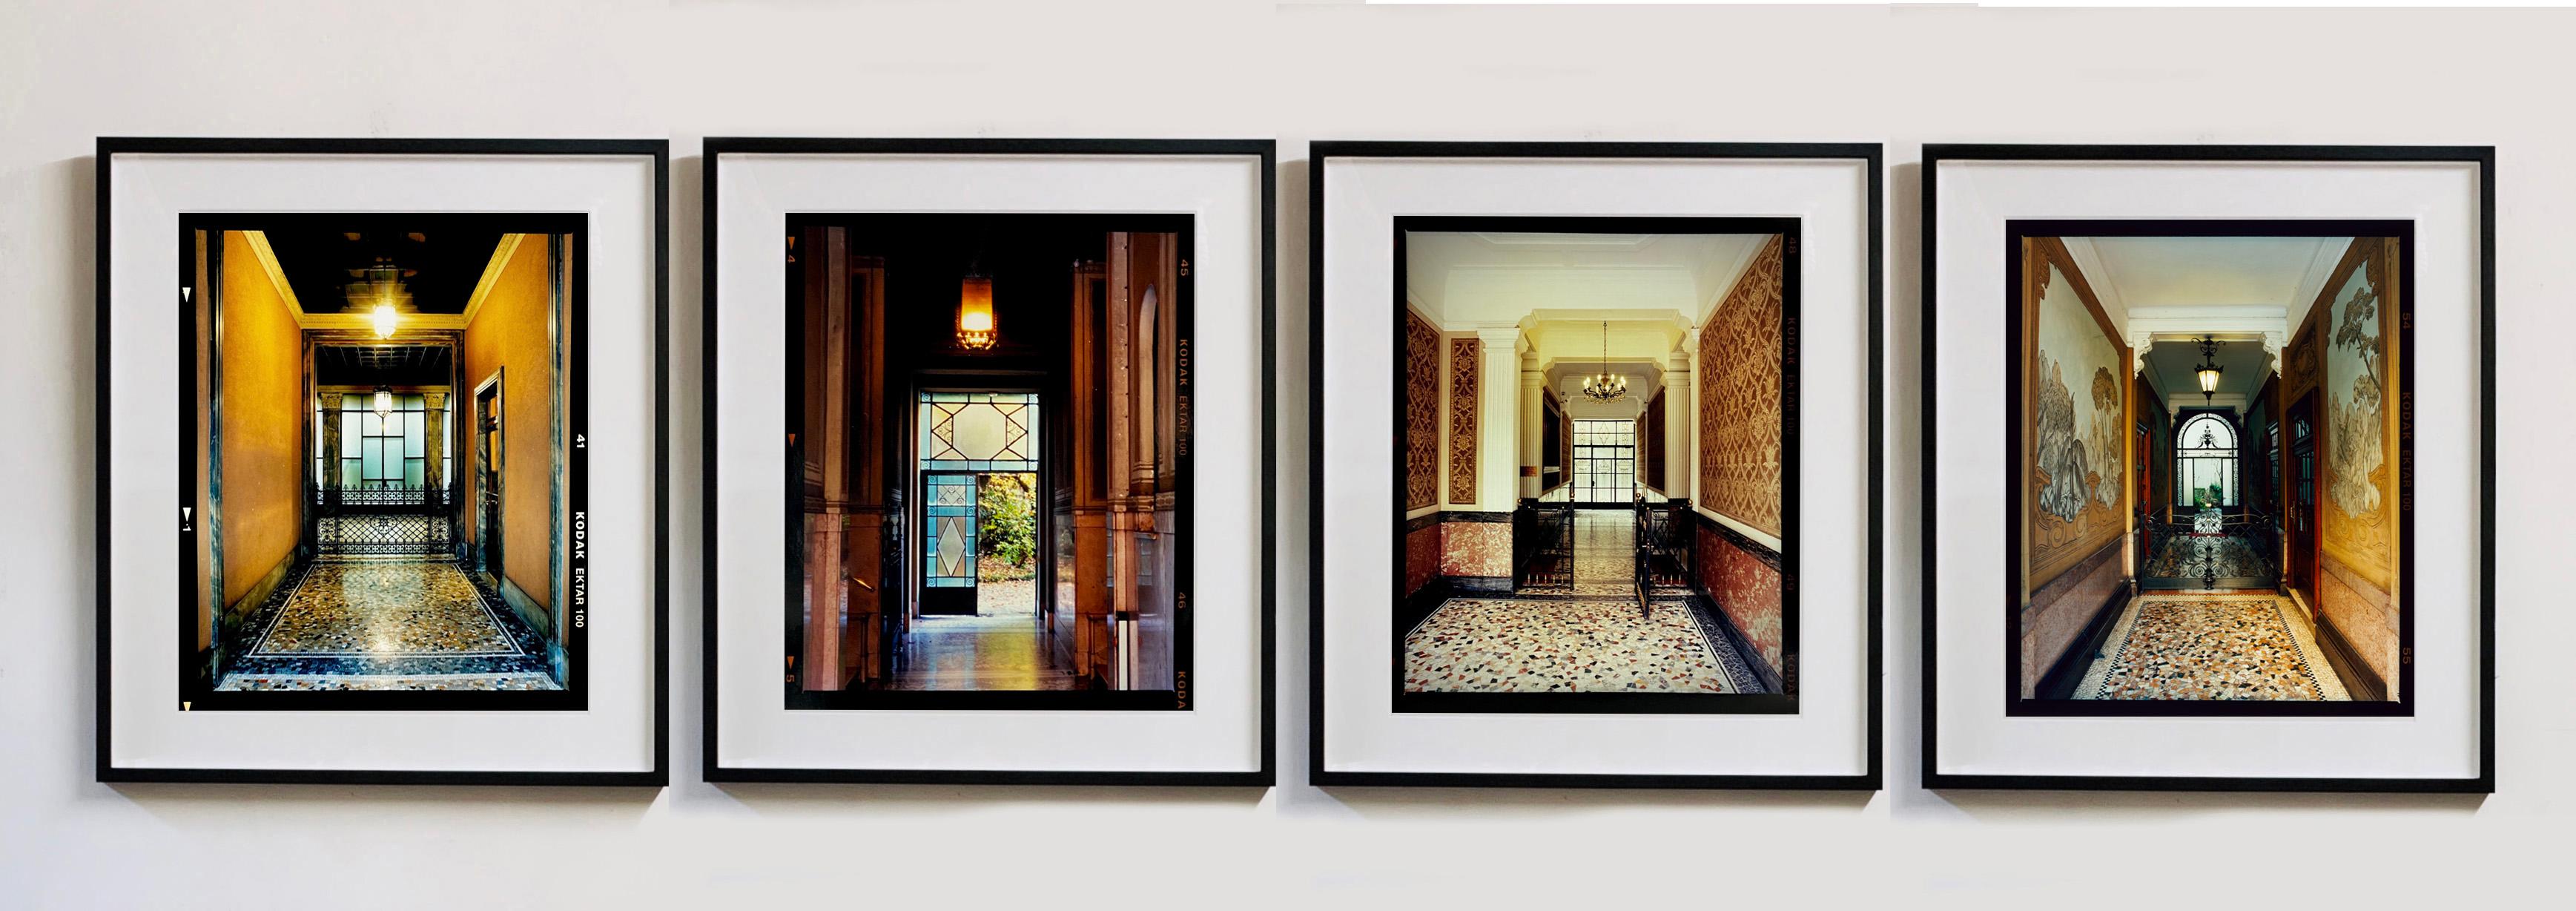 Foyer IV, Milan - Italian architectural color photography For Sale 1